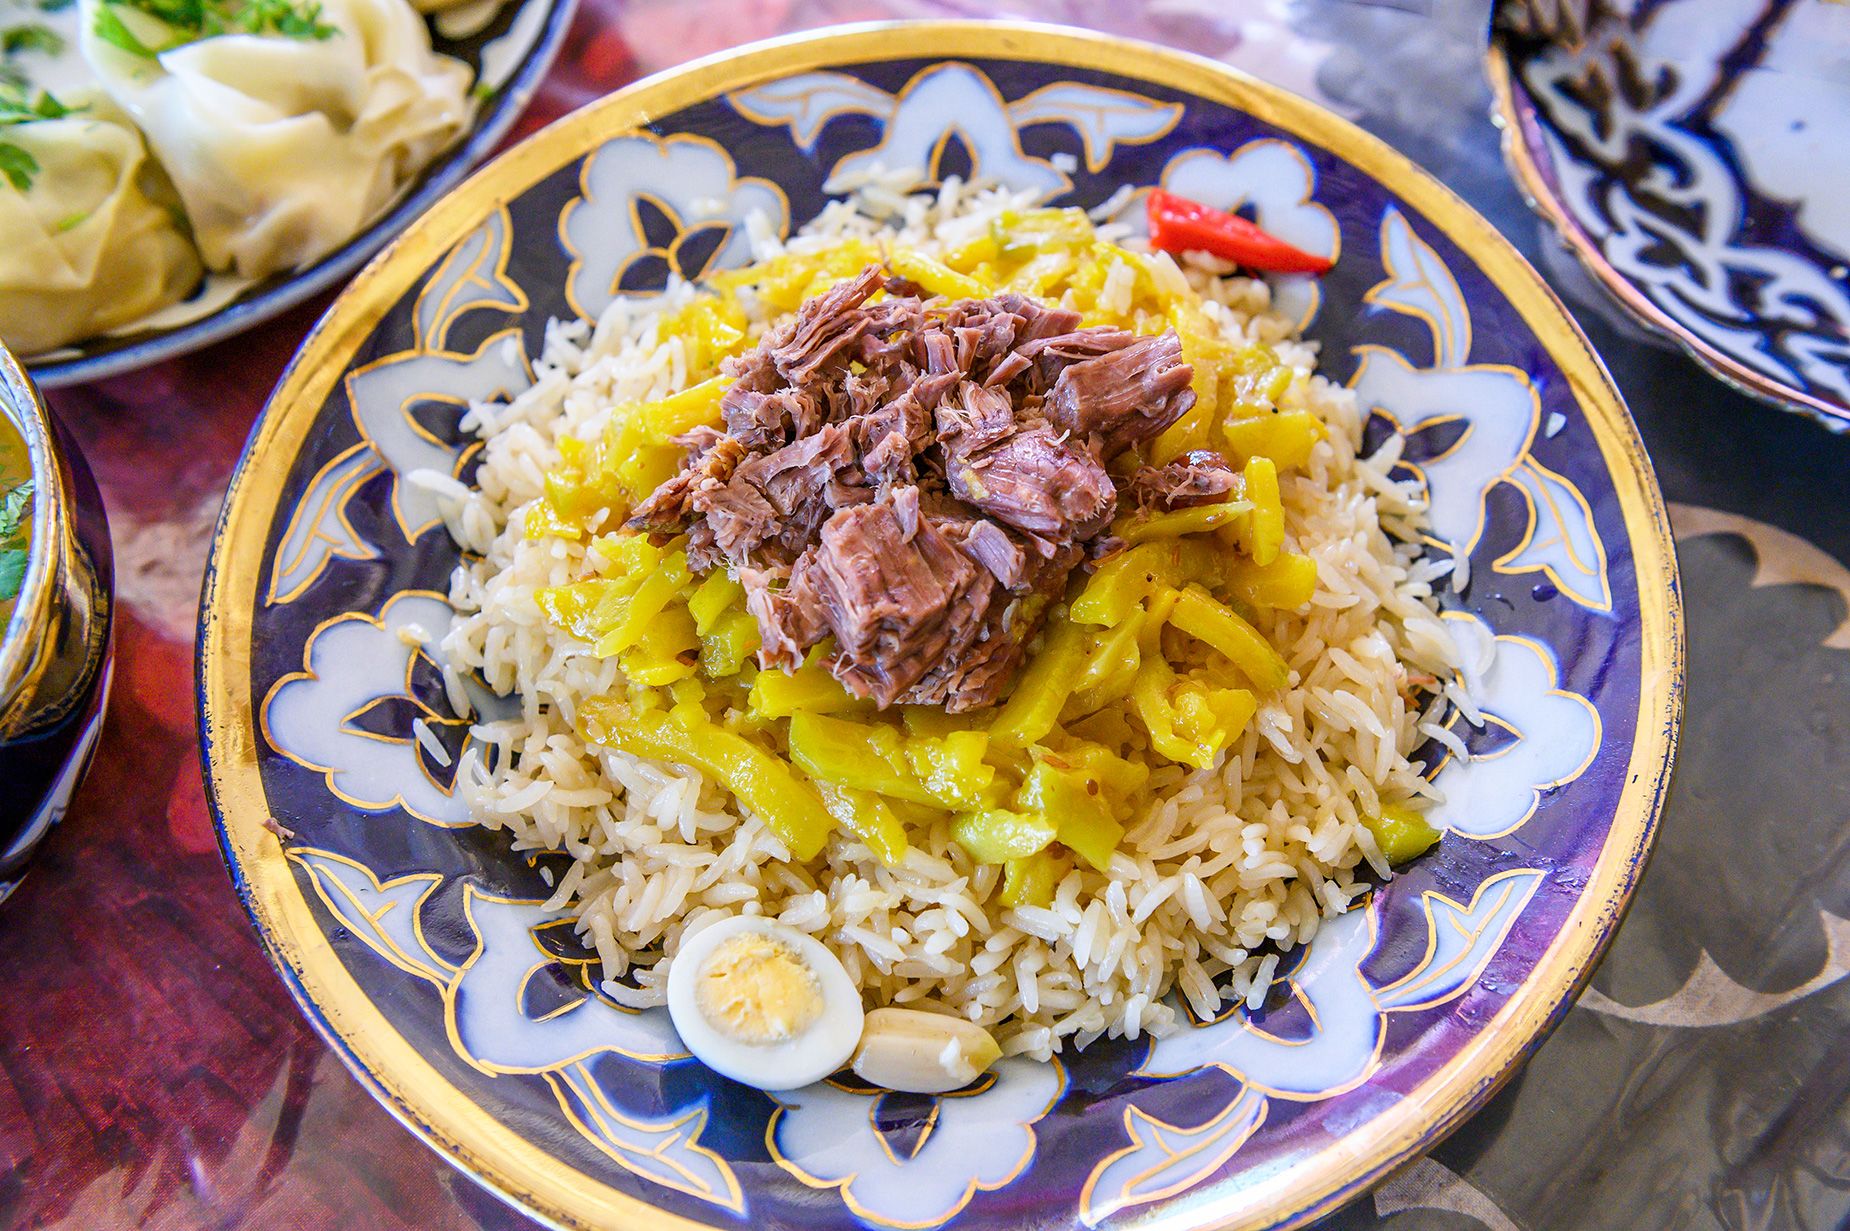 Plov, Uzbekistan's national dish, comes in many forms.